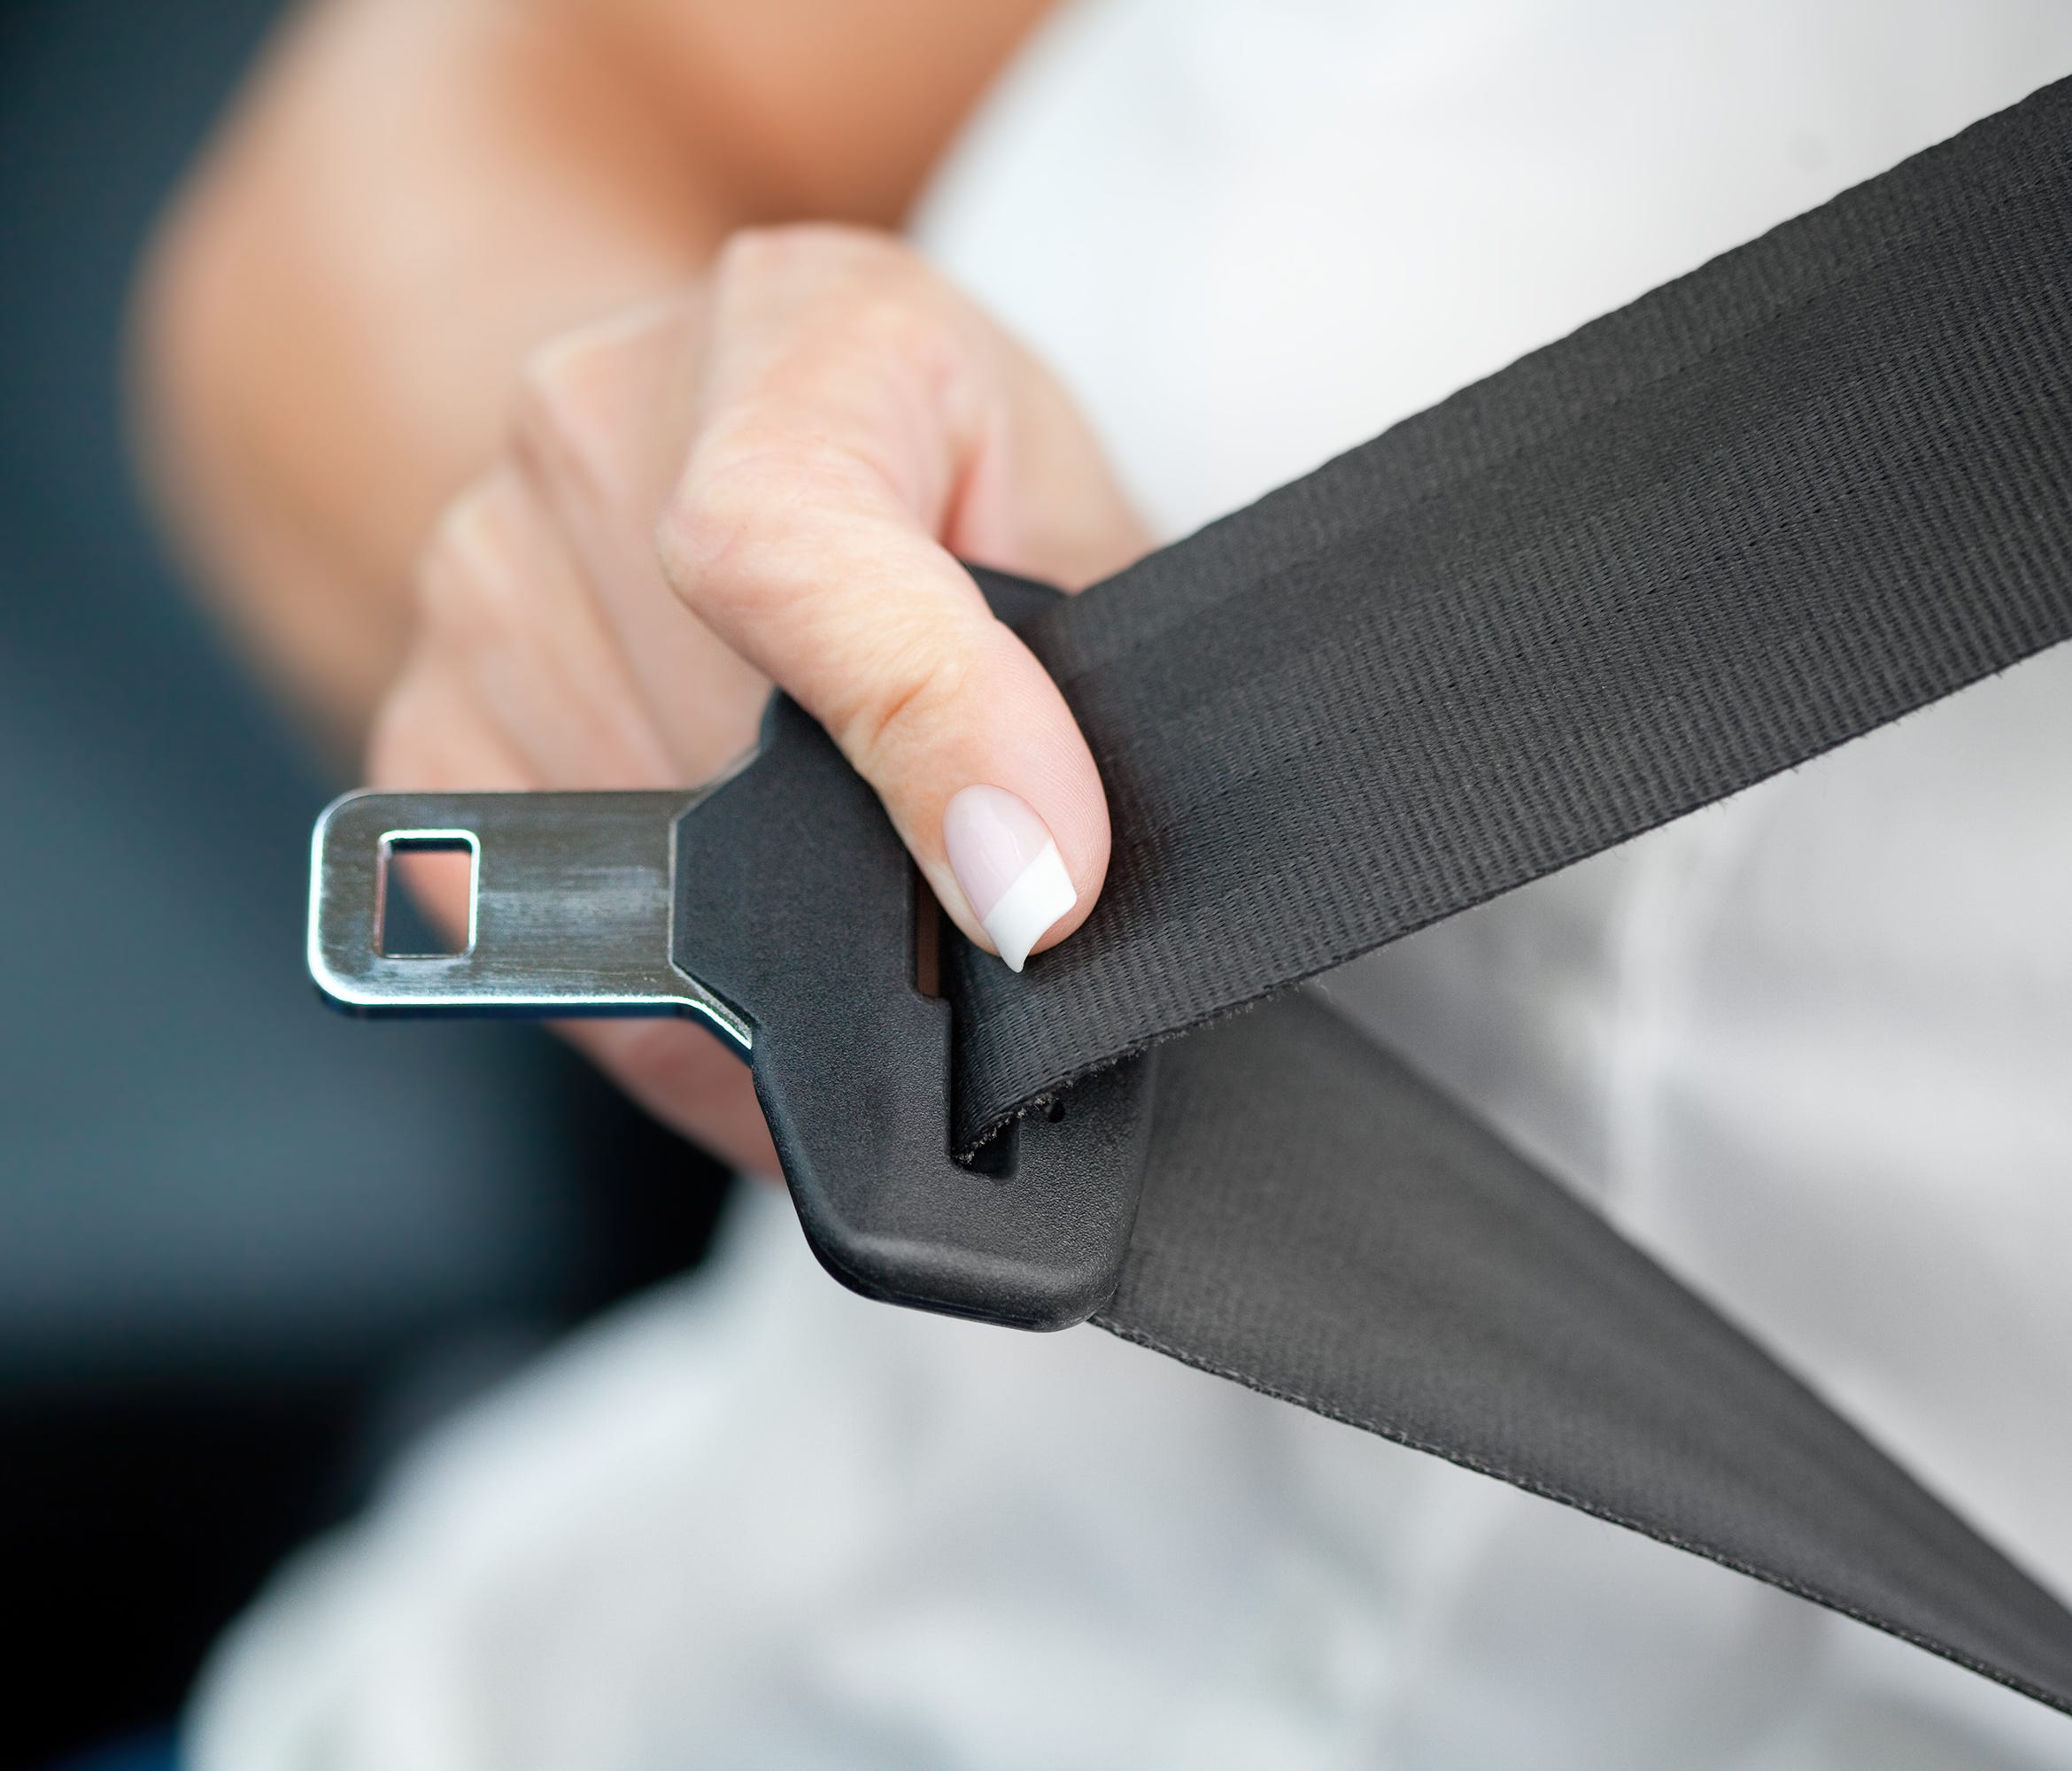 Not buckling up is a problem that is especially acute for travelers — in taxicabs, rideshare vehicles, rental cars and shuttle buses.